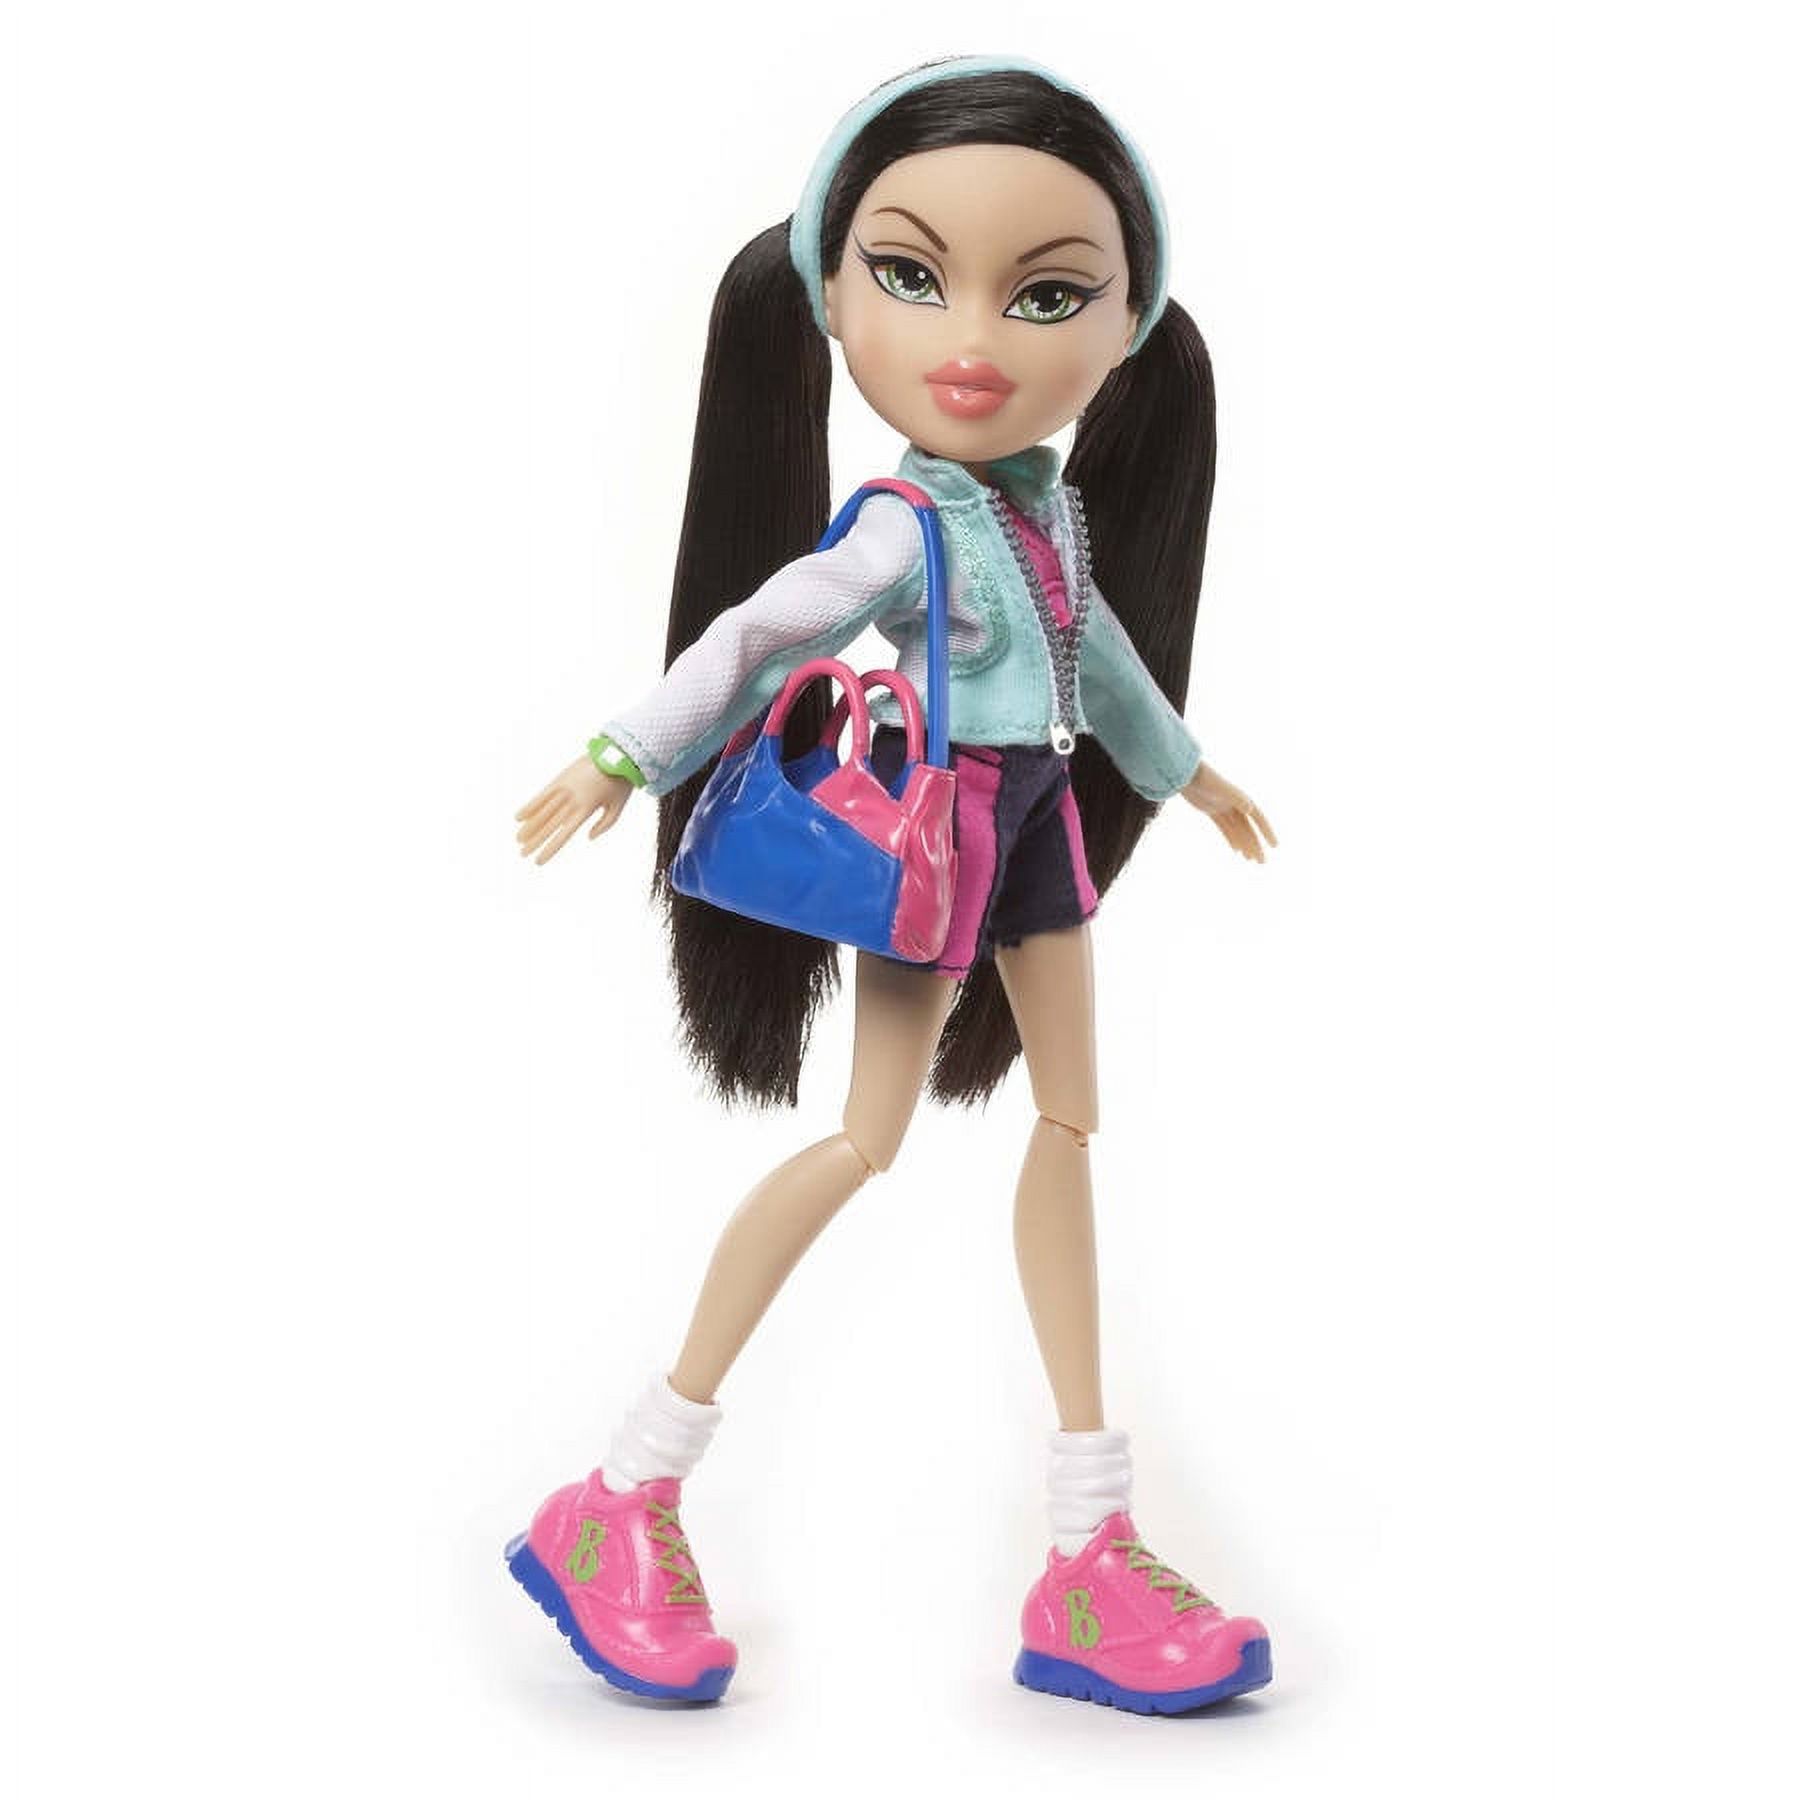 Bratz Fierce Fitness Doll, Jade, Great Gift for Children Ages 6, 7, 8+ - image 2 of 5